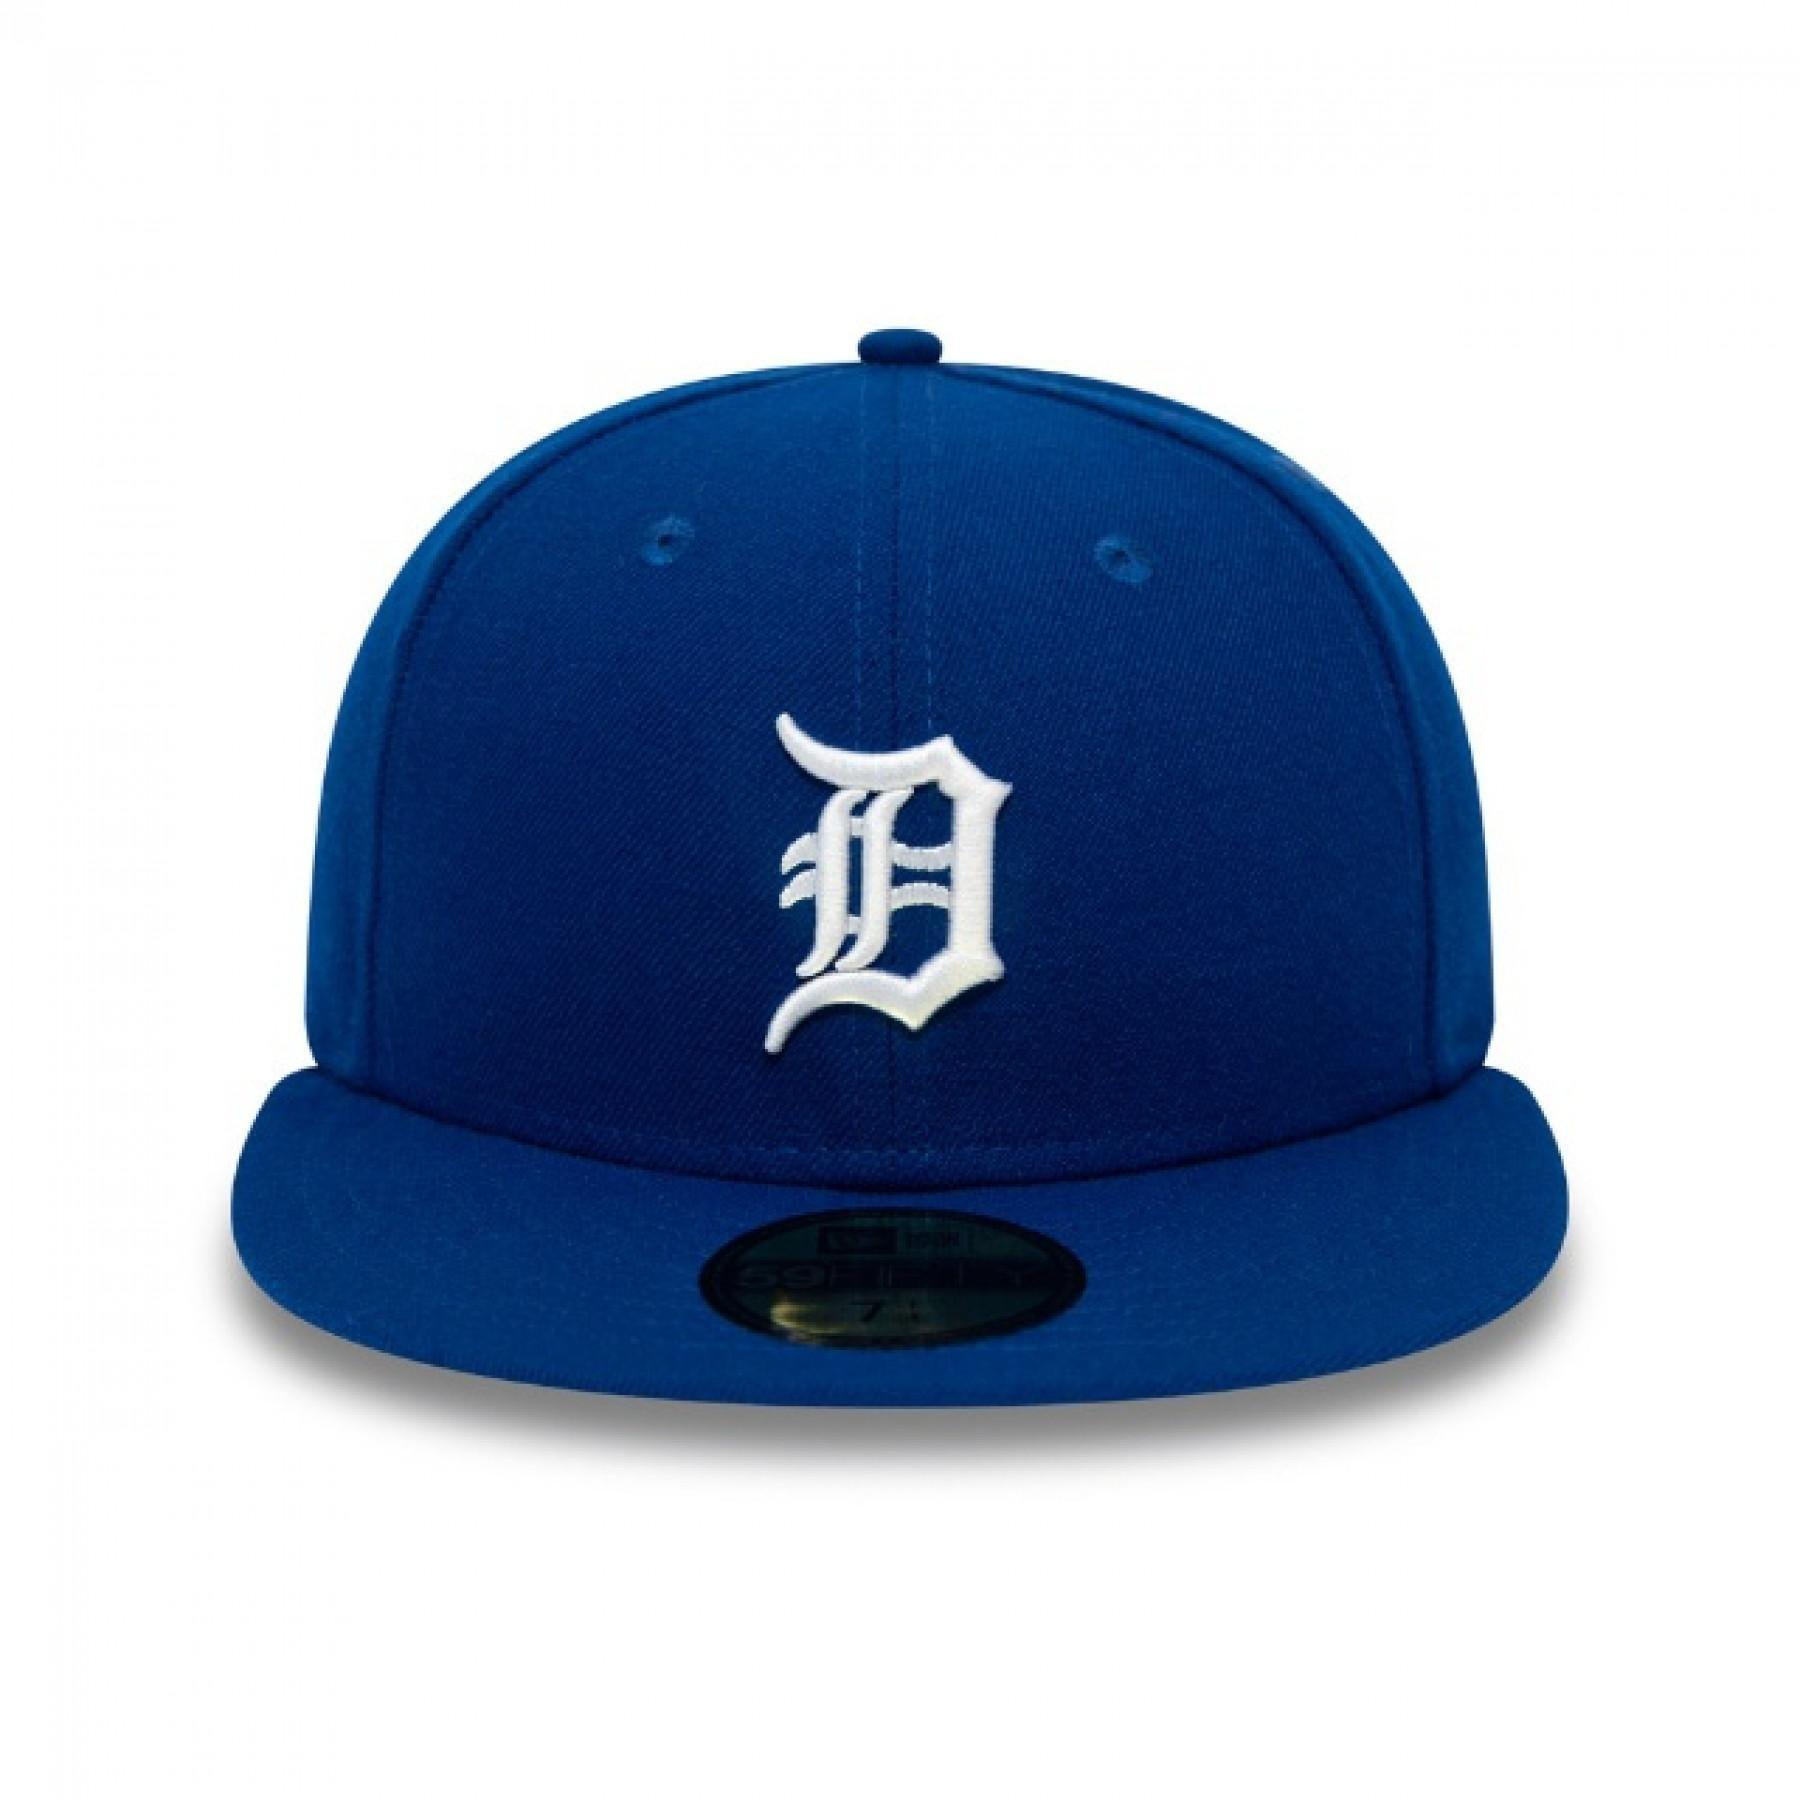 Kappe New Era Tigers League Essential 59fifty